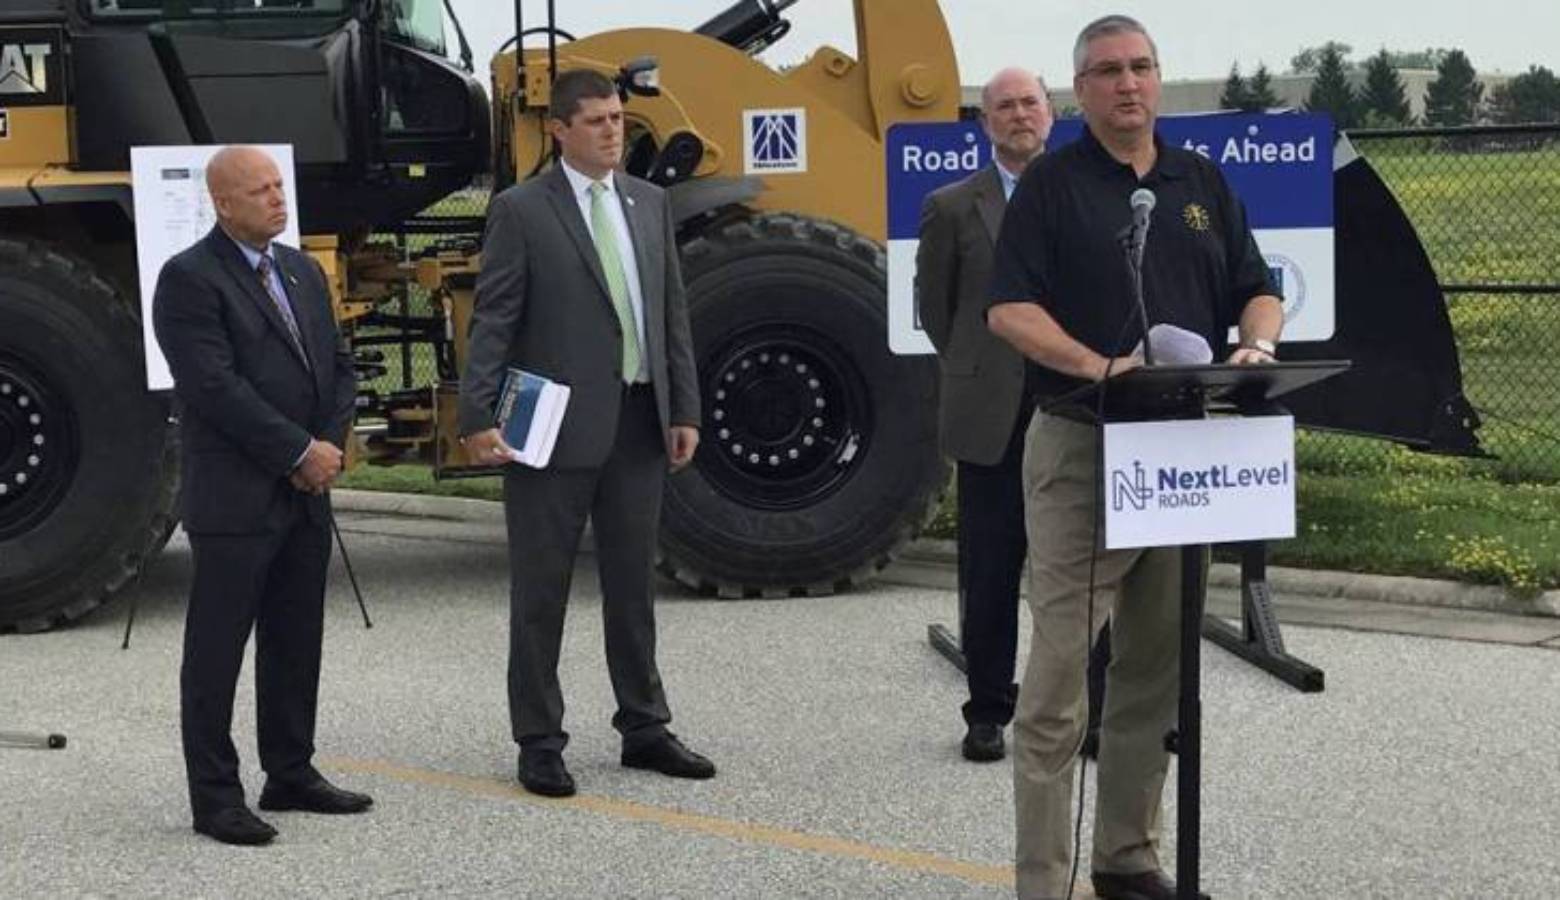 The plan would result in 10,000 miles of existing highways being resurfaced.